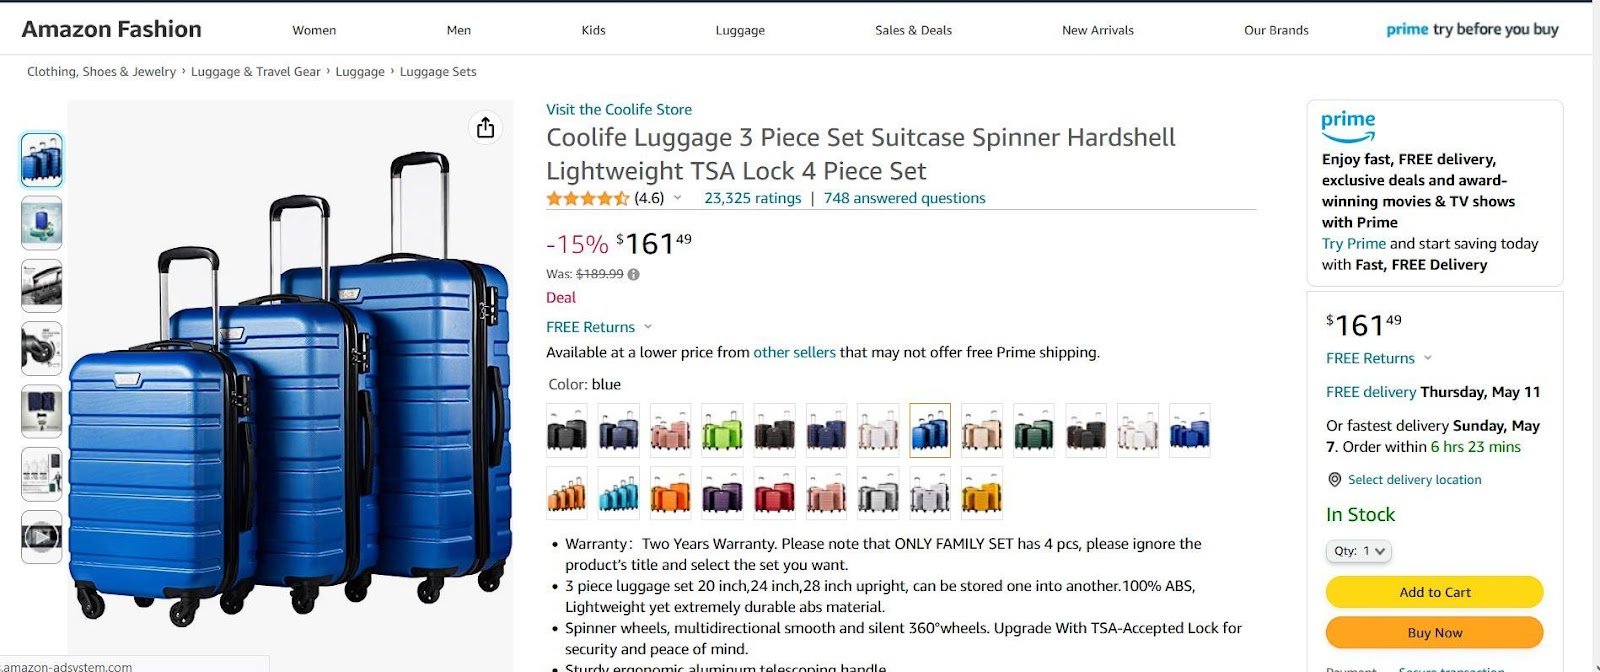 Coolife Luggage Product Page Amazon Screenshot Product Page Guide Salsify Salsify Product Pages Product Detail Page Examples